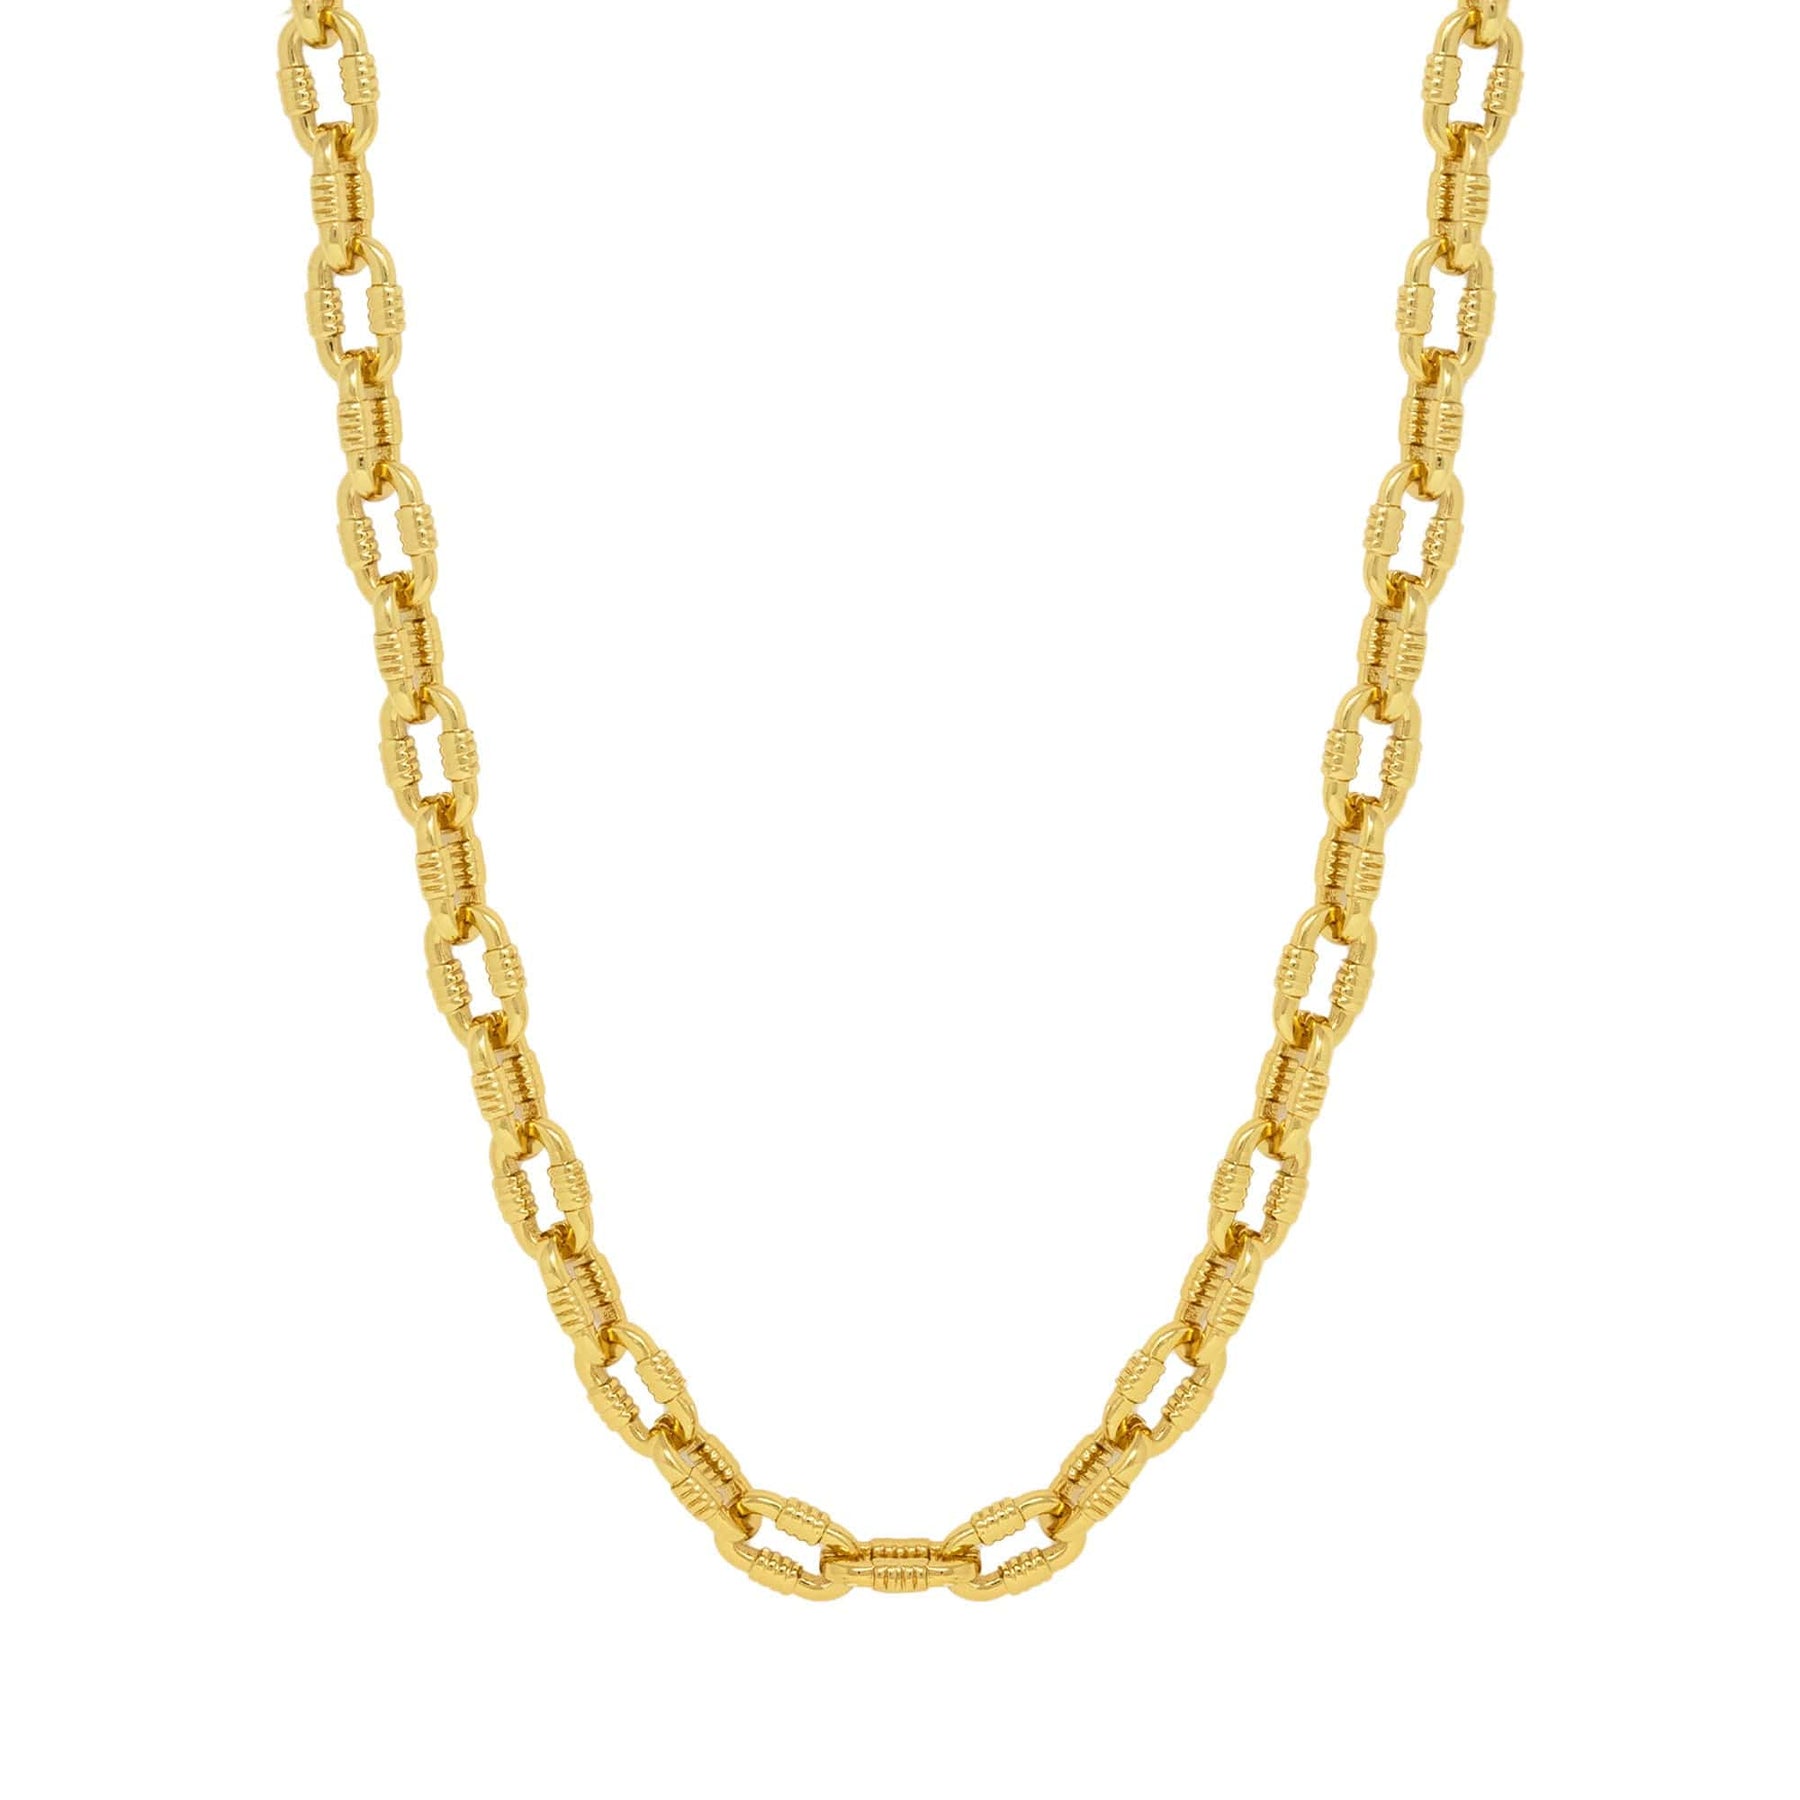 BohoMoon Stainless Steel Lima Necklace Gold